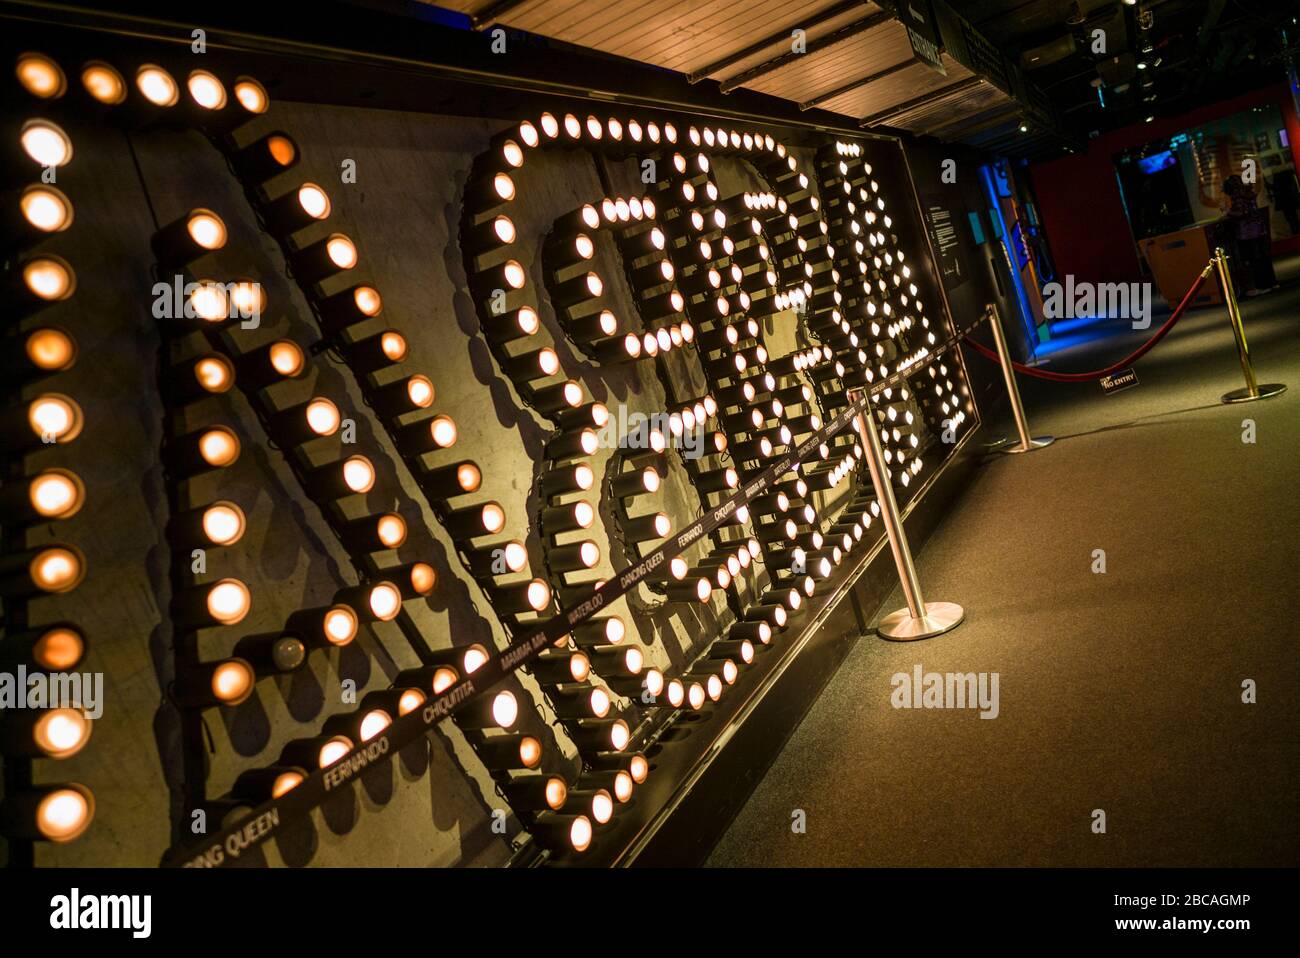 Sweden, Stockholm, Djurgarden, ABBA Museum, museum to the Swedish pop group Abba, sign Stock Photo